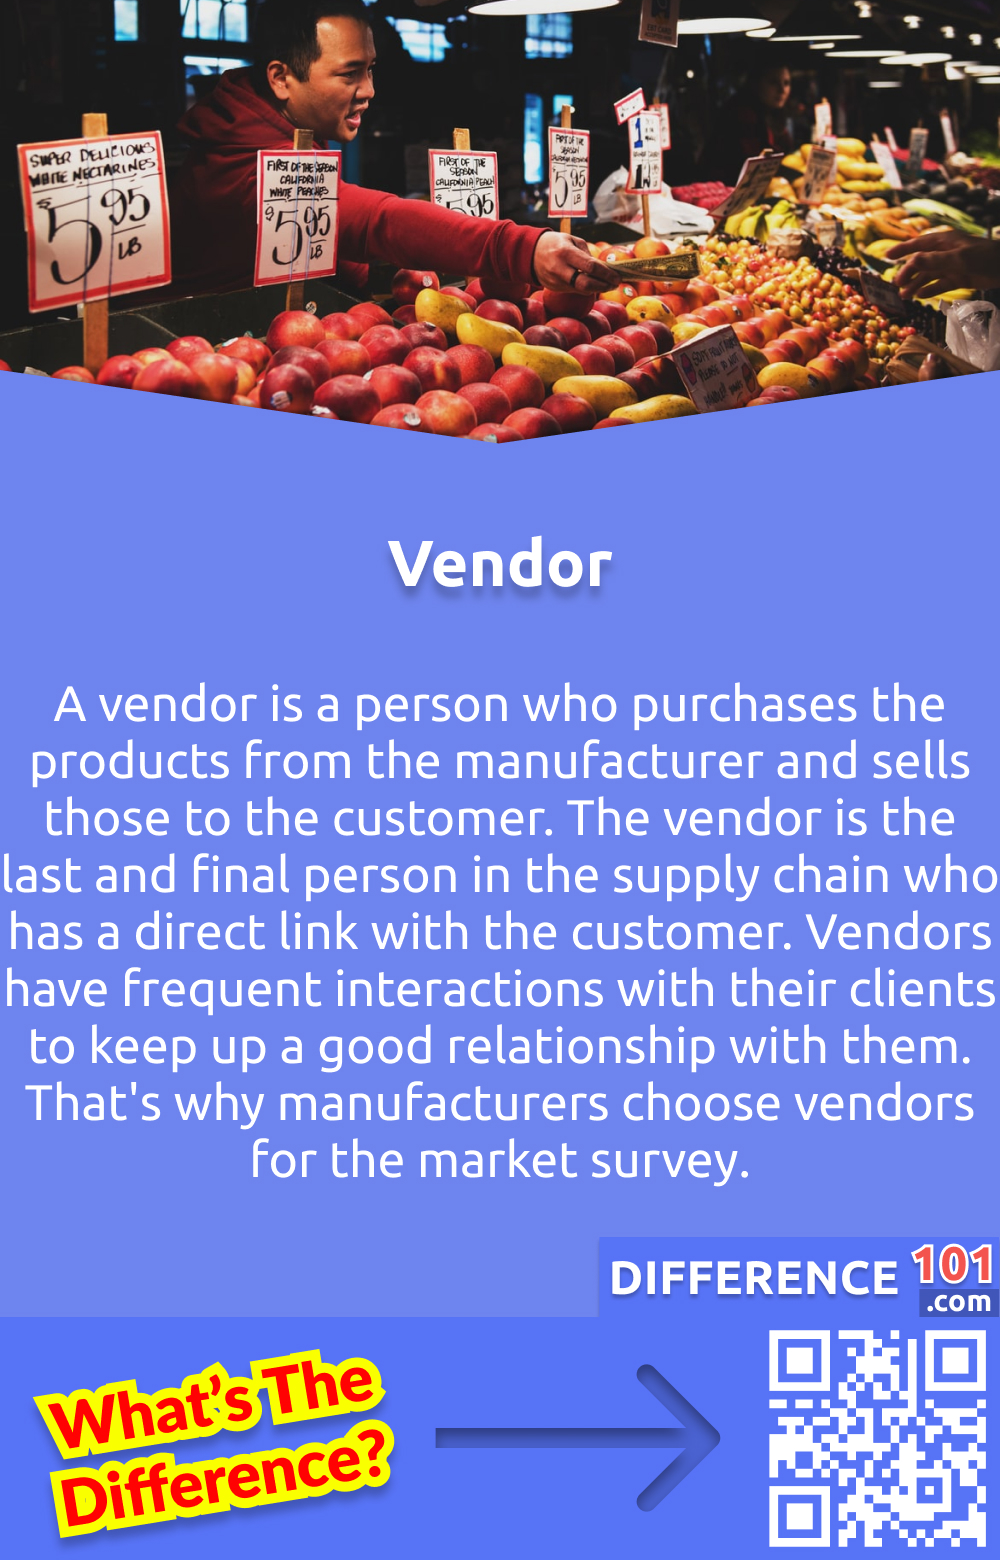 Who is the Vendor? A vendor is a person who purchases the products from the manufacturer and sells those to the customer. The vendor is the last and final person in the supply chain who has a direct link with the customer. Vendors have frequent interactions with their clients to keep up a good relationship with them. That's why manufacturers choose vendors for the market survey.